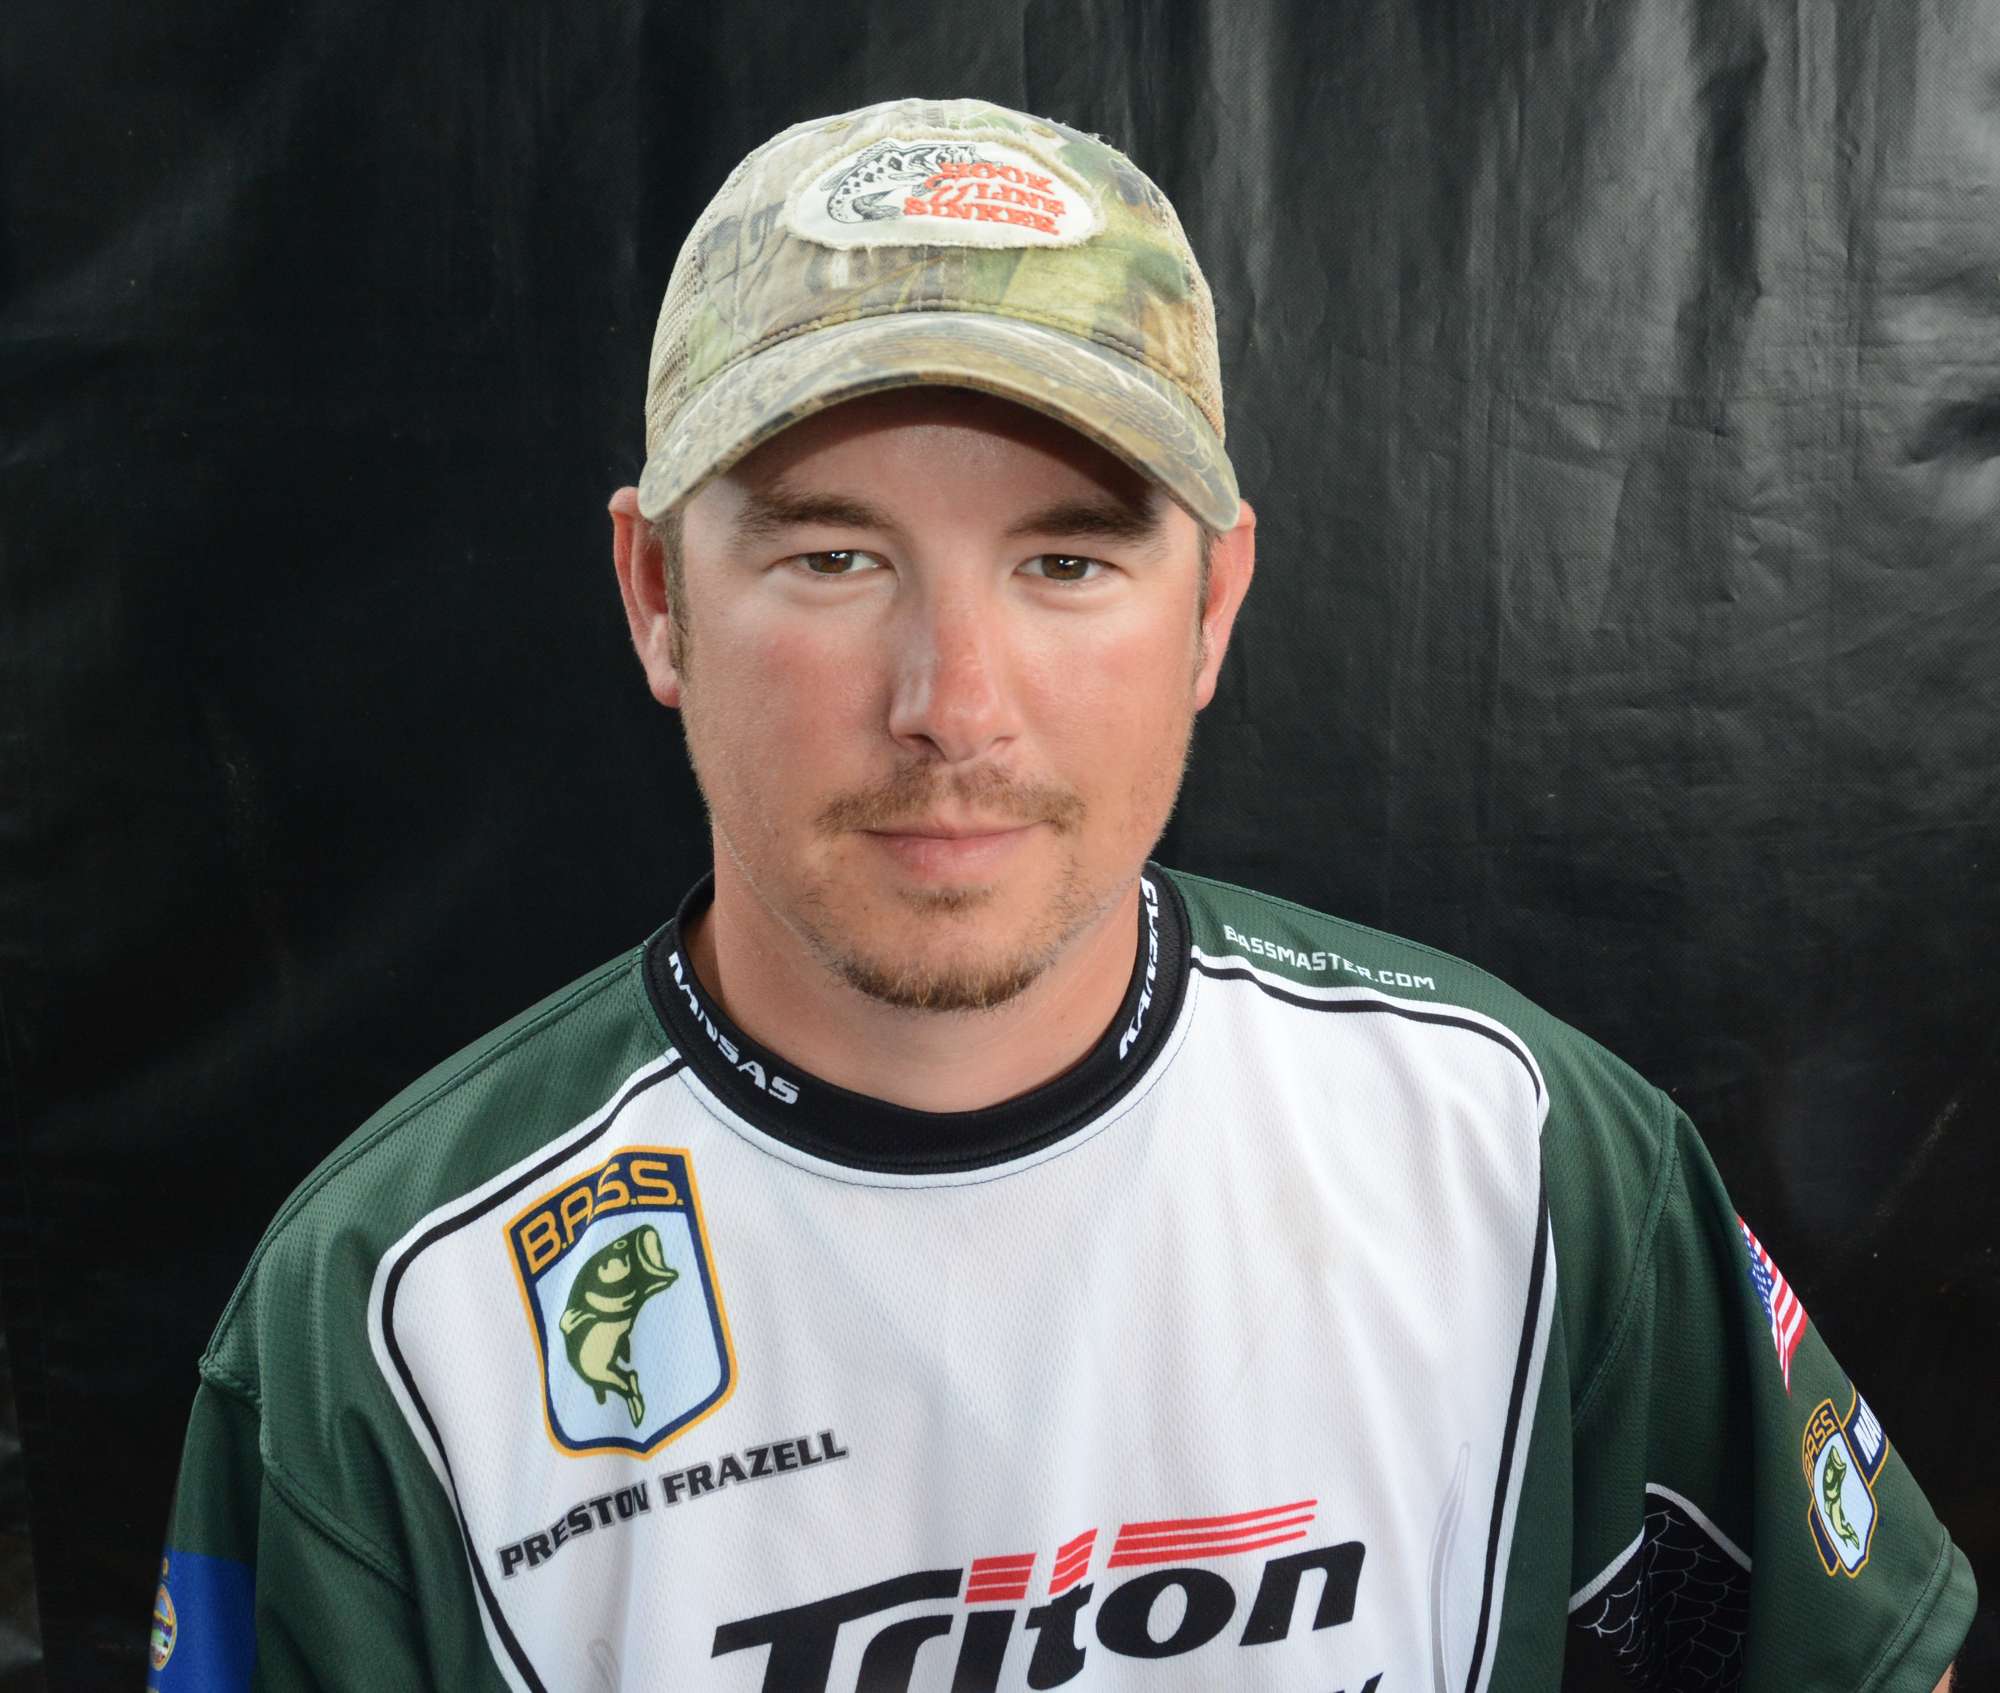 Preston Frazell was in the championship last year when it was on the Ouachita River, so this Oklahoma angler â who's representing the Kansas B.A.S.S. Nation â already has some knowledge of the water. Frazell is in sales, but when he's not working or fishing, you can catch him hunting.